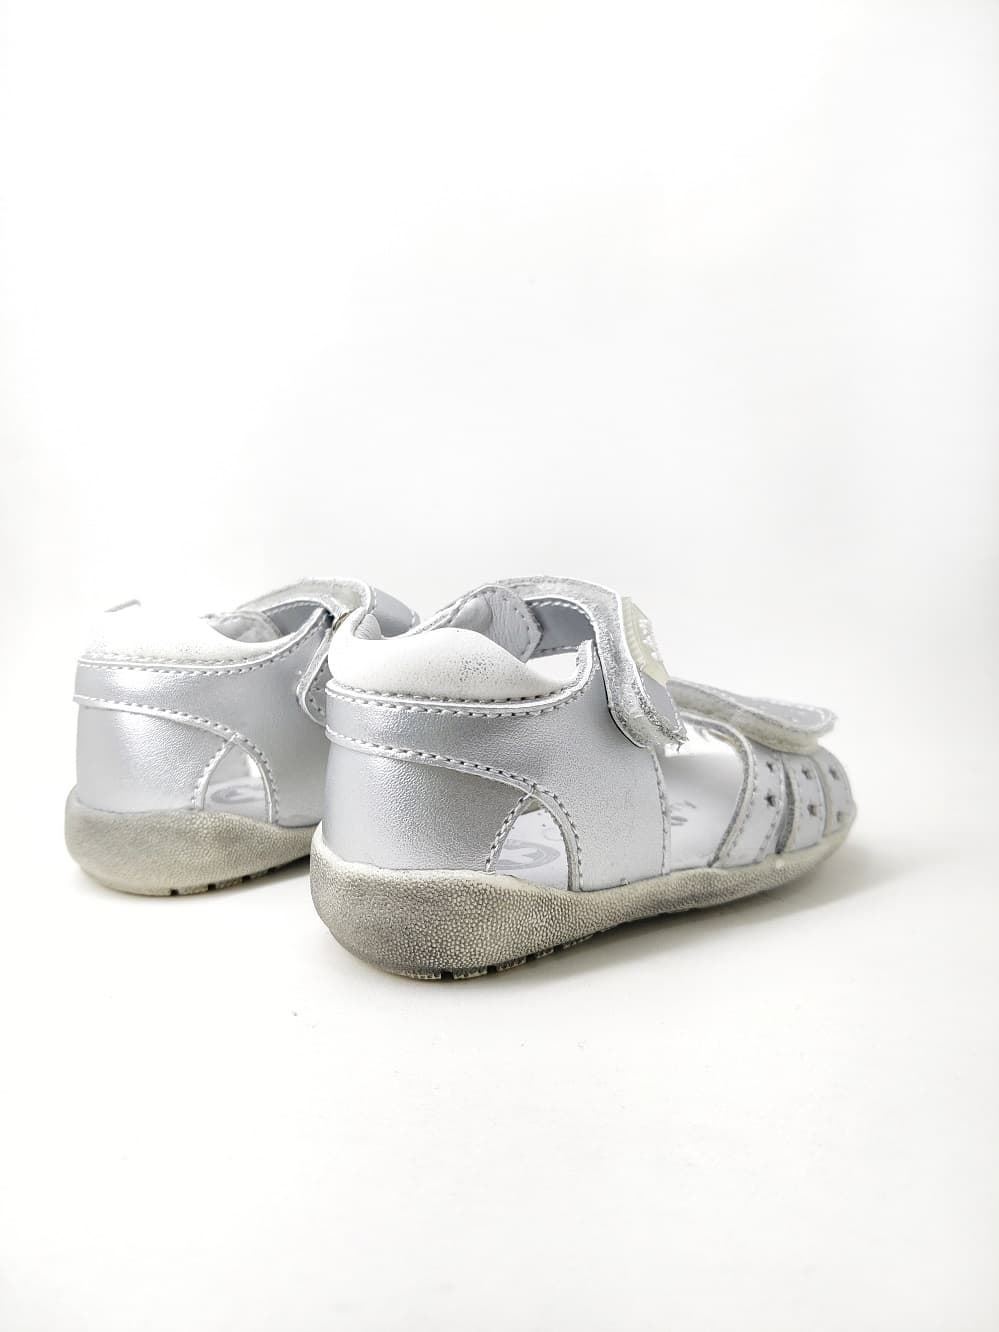 Silver sandals for baby girl with velcro - Image 3